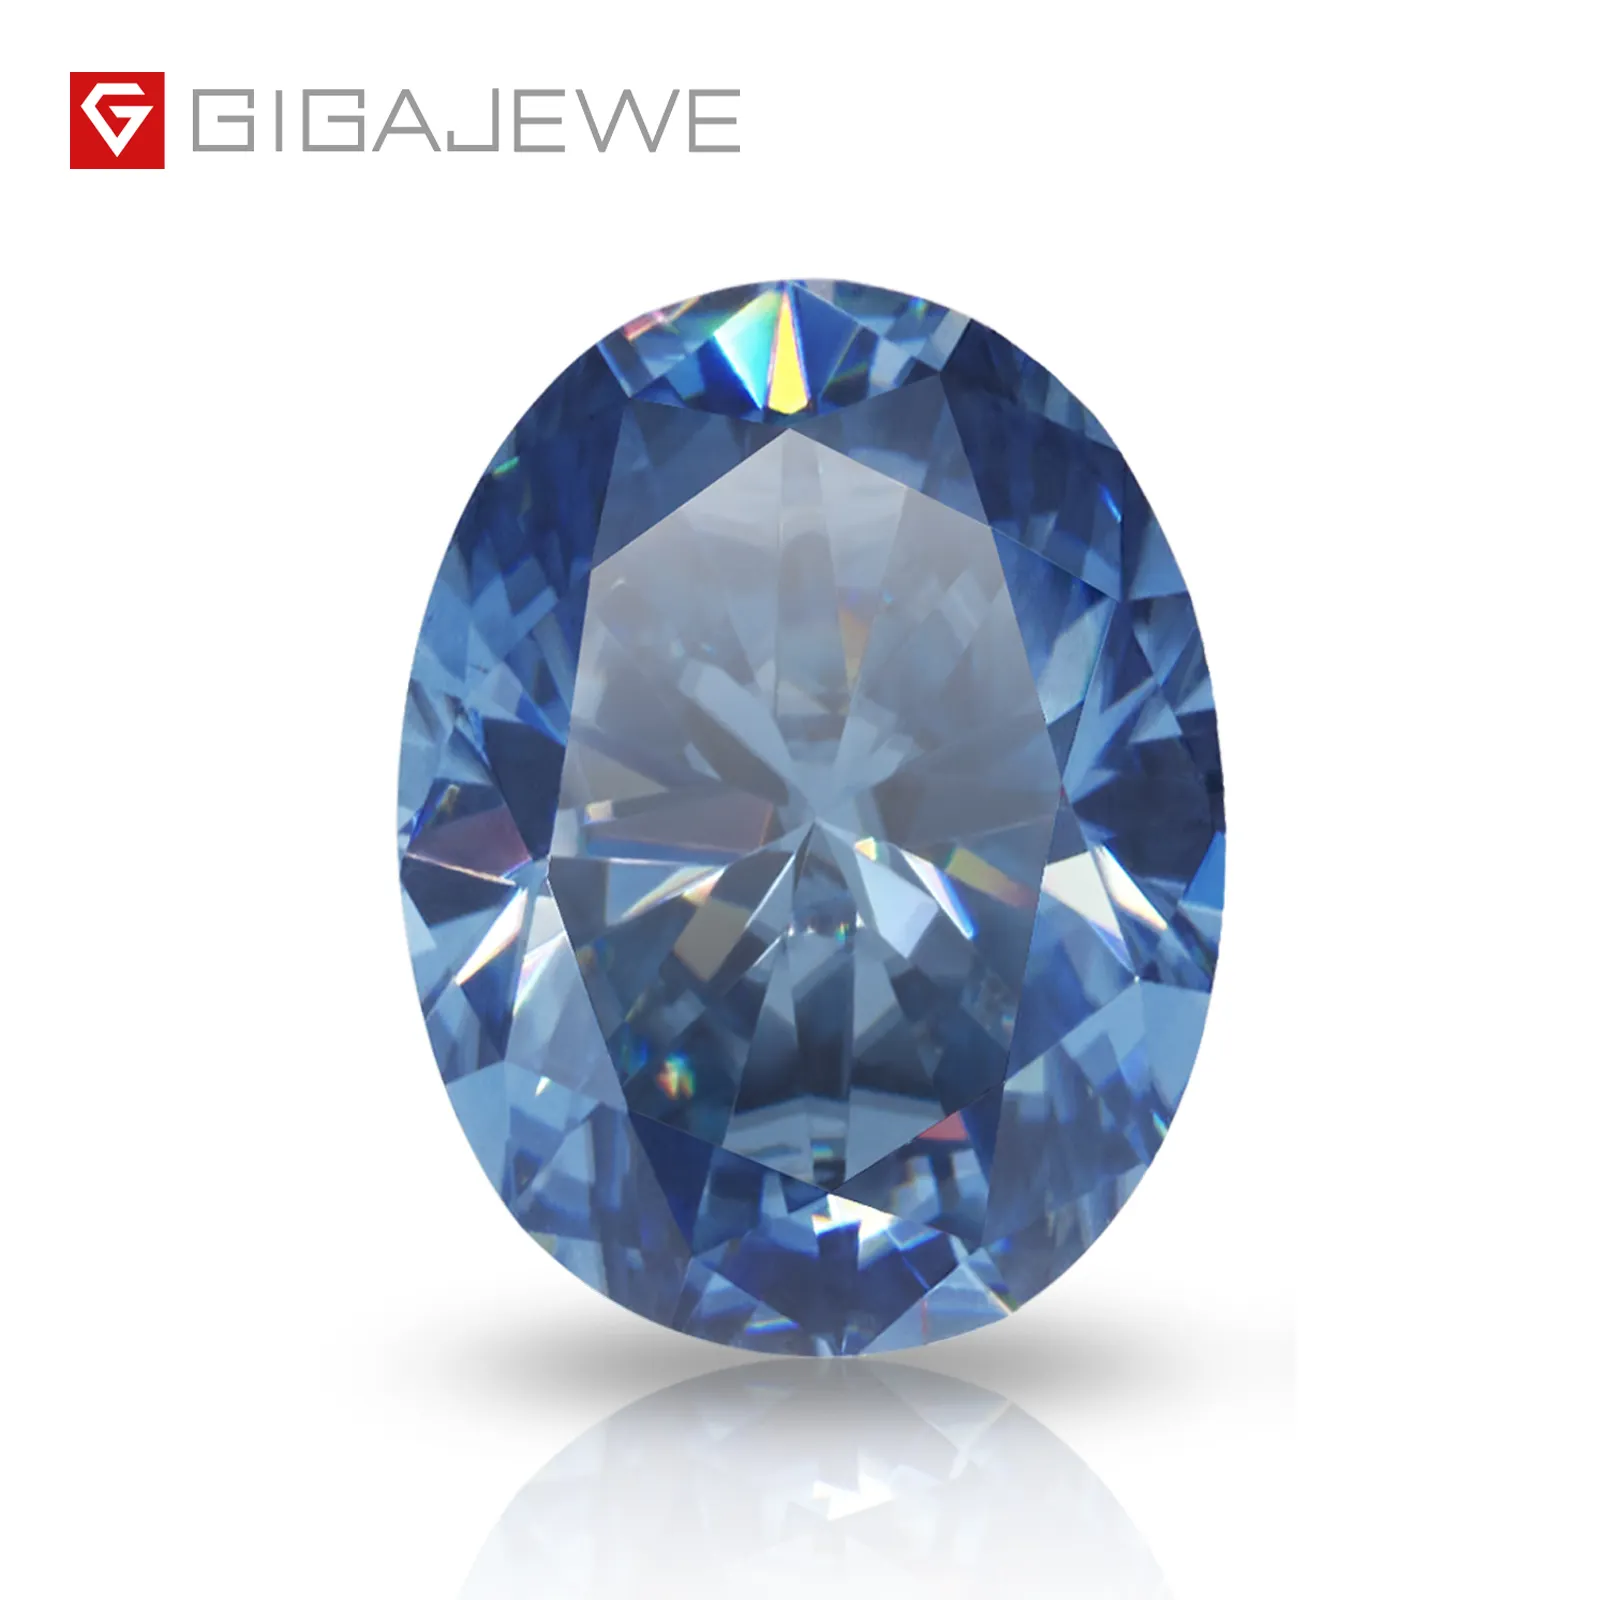 GIGAJEWE Blue color manual cut Moissanite Oval Cut for jewelry making Synthetic Gemstone